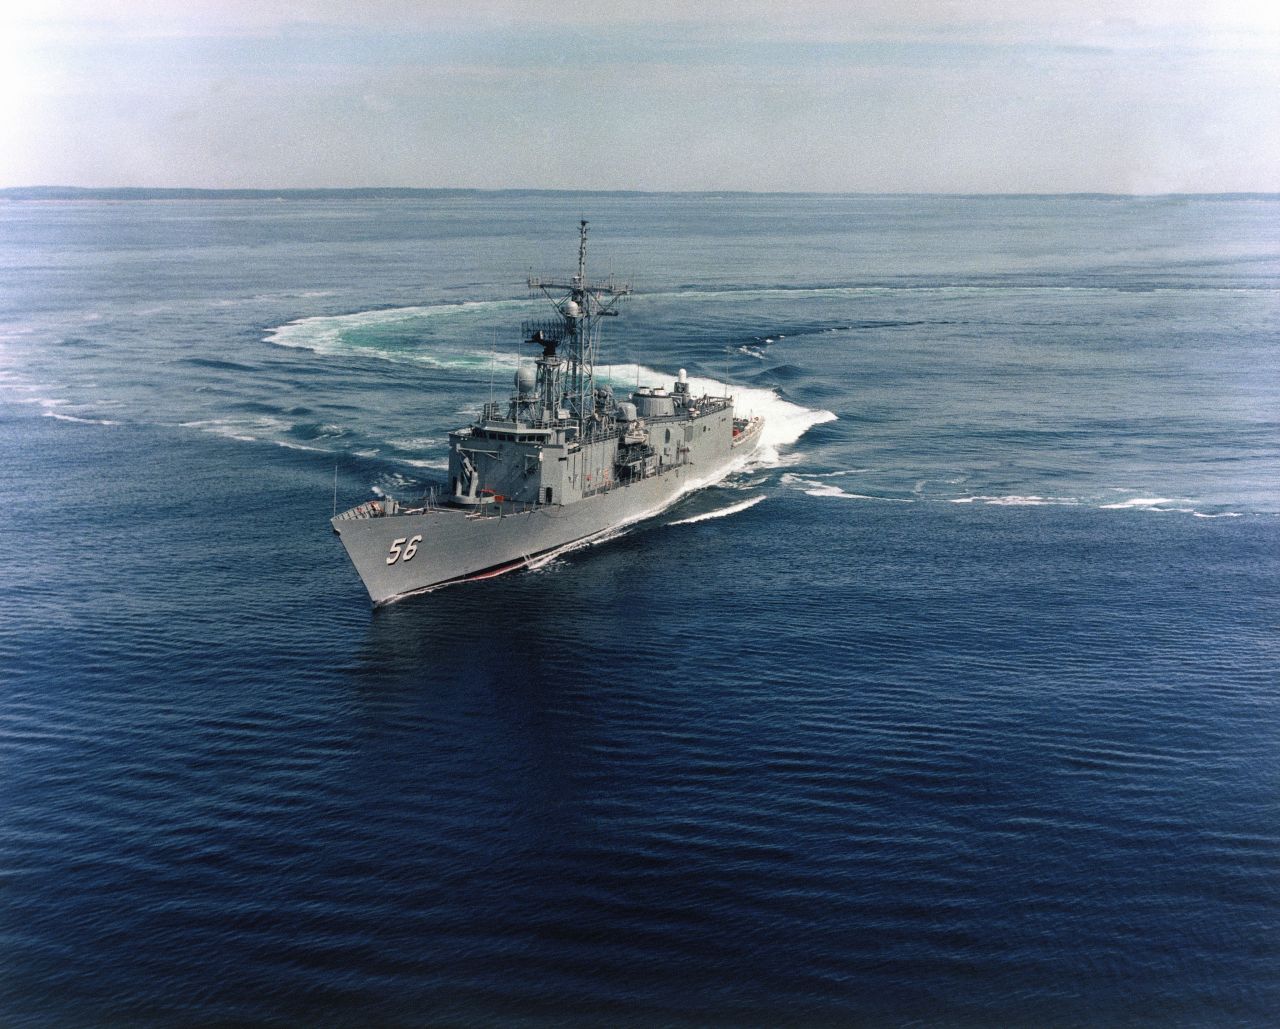 The guided-missile frigate USS Simpson floats off the coast of New England prior to its commissioning in 1985. The Simpson, the last U.S. Navy frigate, will be decommissioned on September 29.